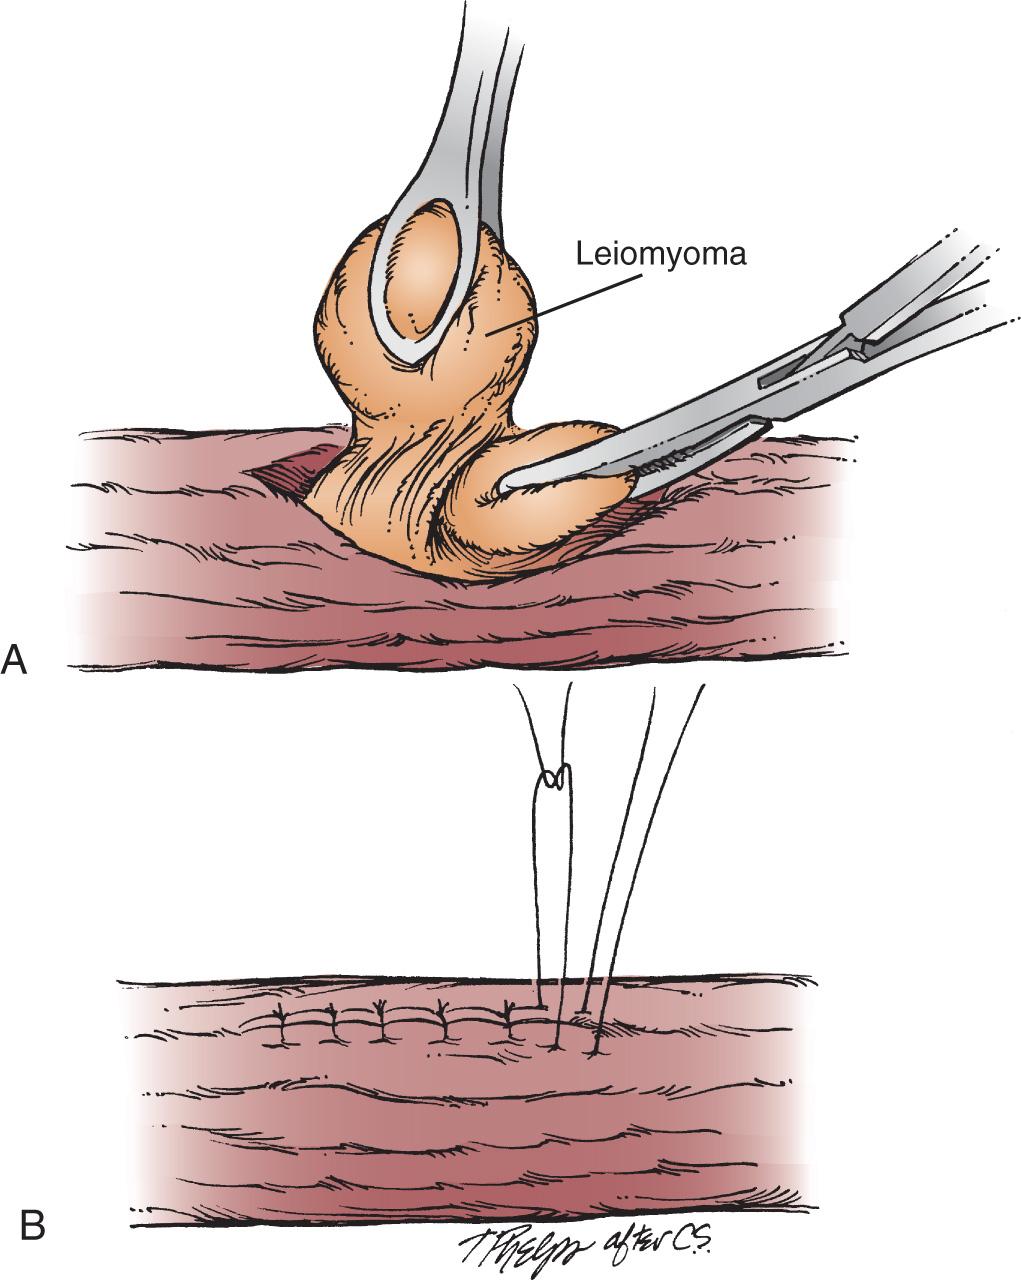 FIGURE 46.1, (A) The esophageal muscular fibers are split and the leiomyoma is bluntly extracted from the esophageal wall. (B) Once removed, the muscular defect is reapproximated.